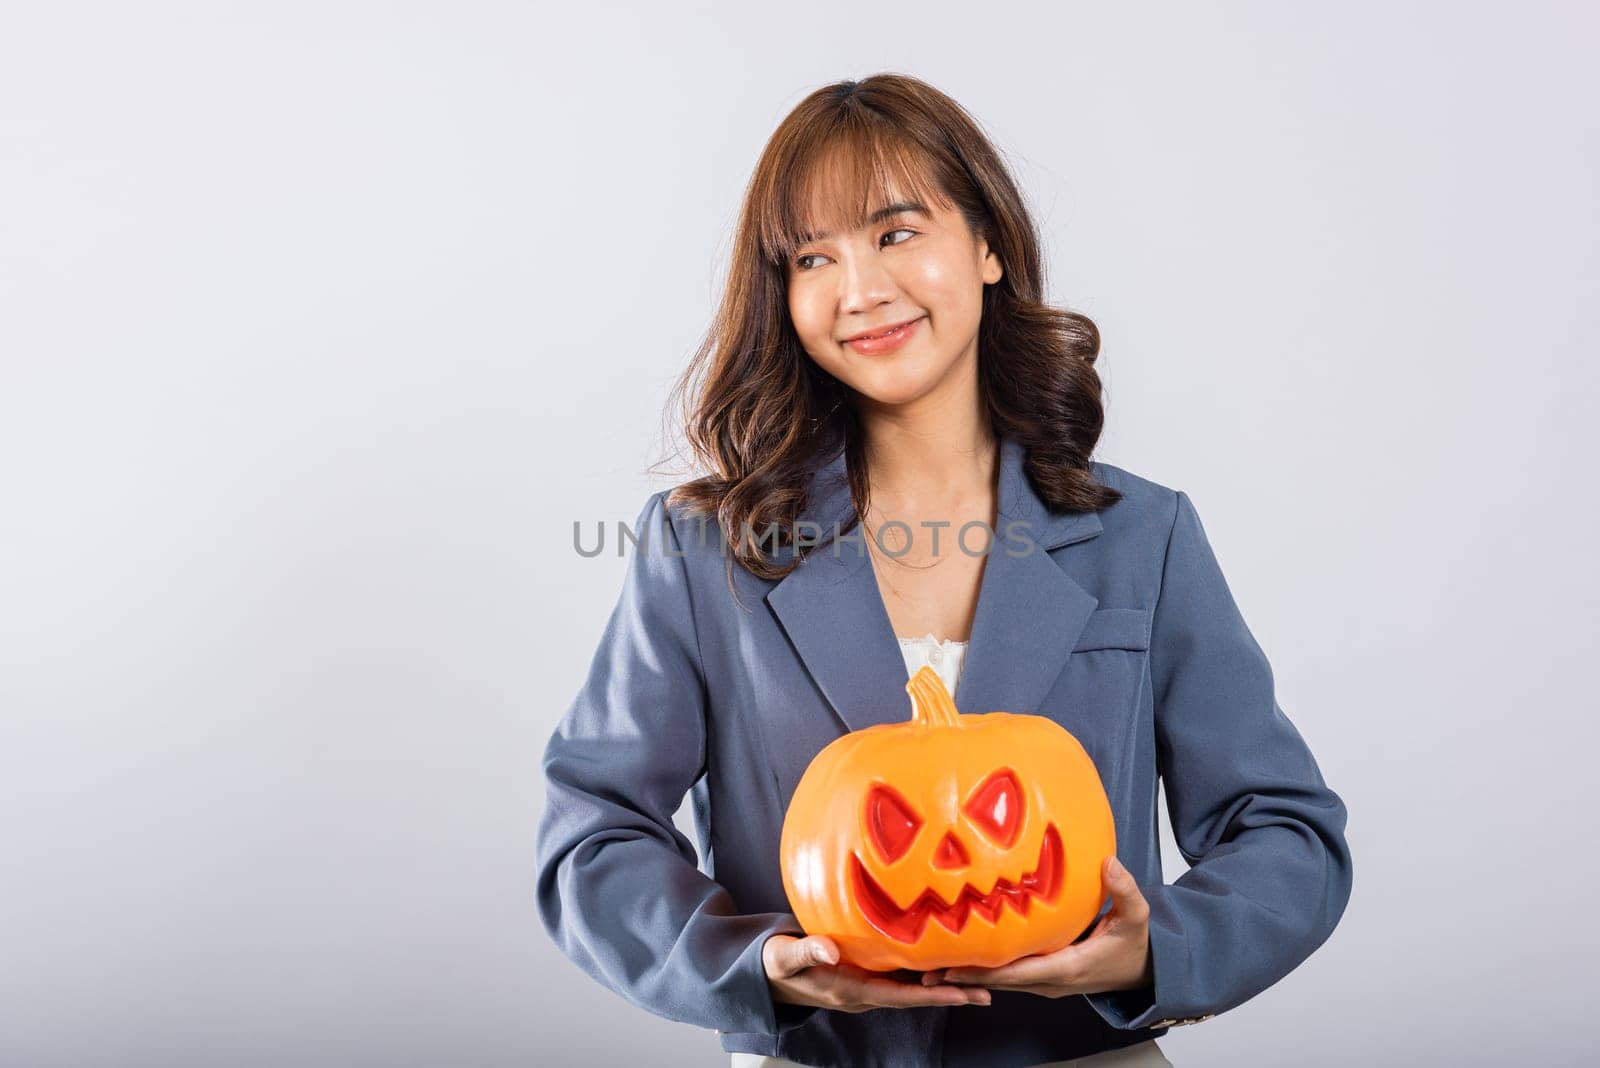 A charming young woman's portrait captures her delight as she holds an orange pumpkin, her joy mirrored by a collection of ghost pumpkins in this studio shot, all set against a white background.